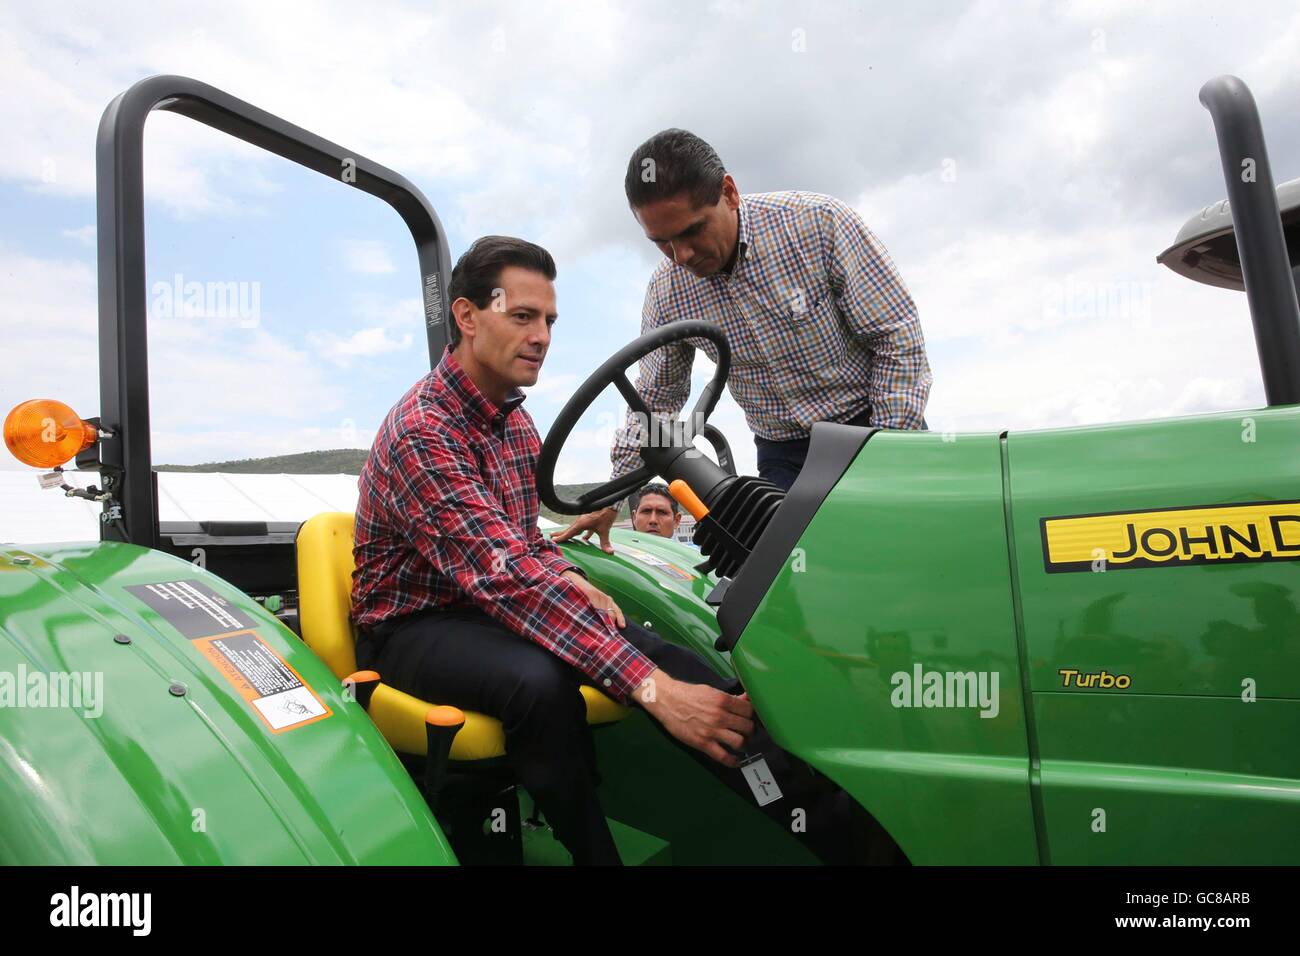 Mexican President Enrique Pena Nieto, sitting, is shown how to operate a John Deere tractor by Michoacan Governor Silvano Aureoles during a ceremony to deliver 600 farm tractors to poor farmers July 5, 2016 in La Goleta, Charo, Michoacan, Mexico. The government program plans to provide 25,000 tractors to poor farmers by 2018 in the hope of improving agricultural production across the nation. Stock Photo